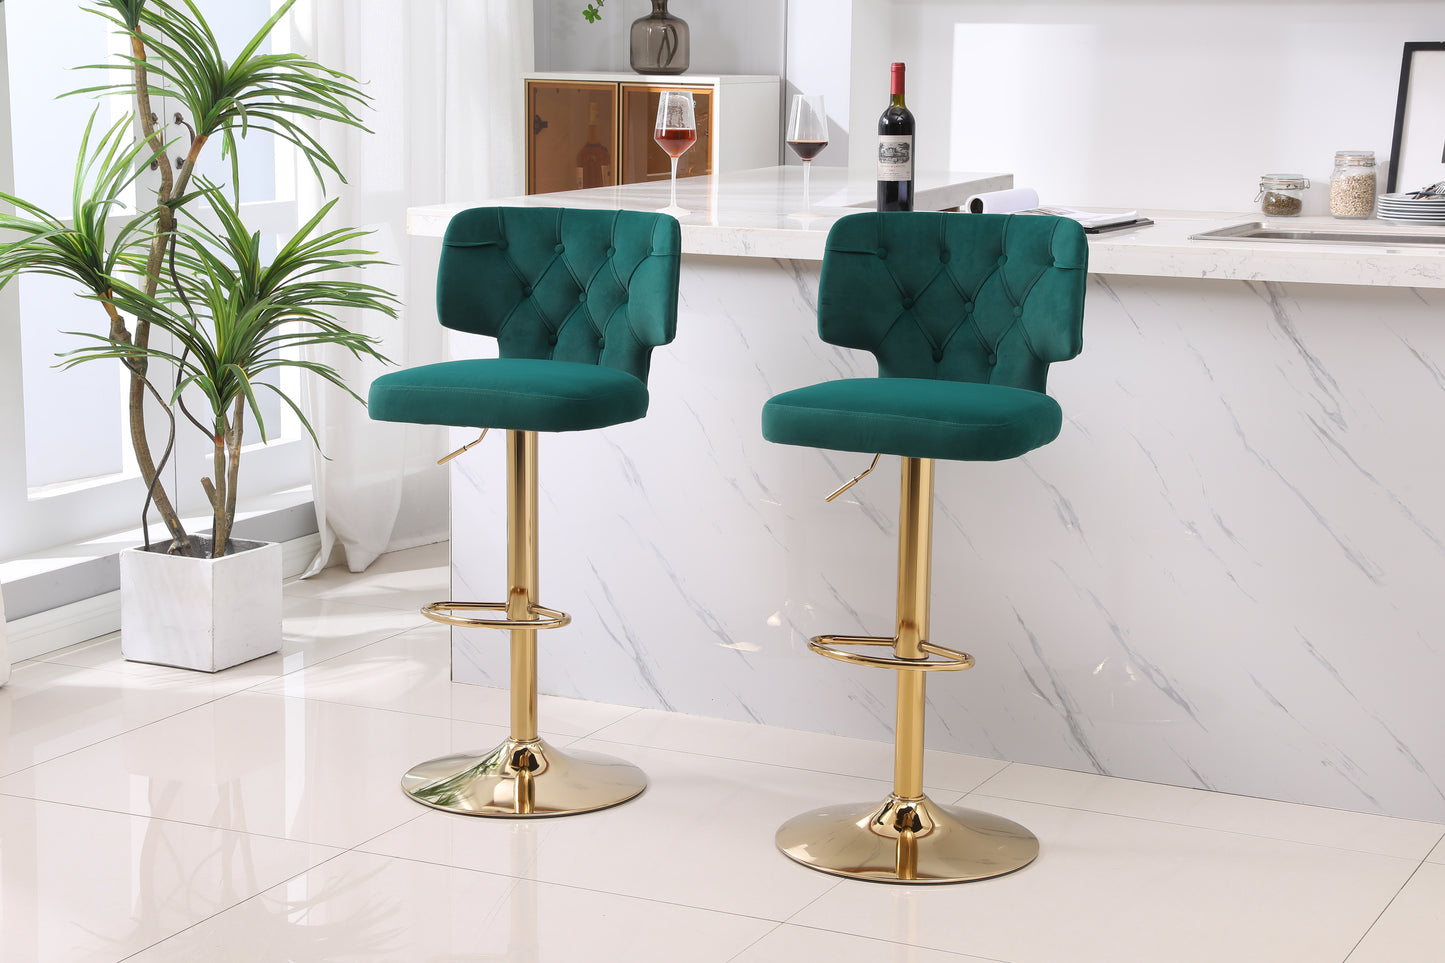 Modern Barstools Bar Height, Swivel Velvet Bar Stool Counter Height Bar Chairs Adjustable Tufted Stool with Back& Footrest for Home Bar Kitchen Island Chair (Emerald, Set of 2) - Enova Luxe Home Store